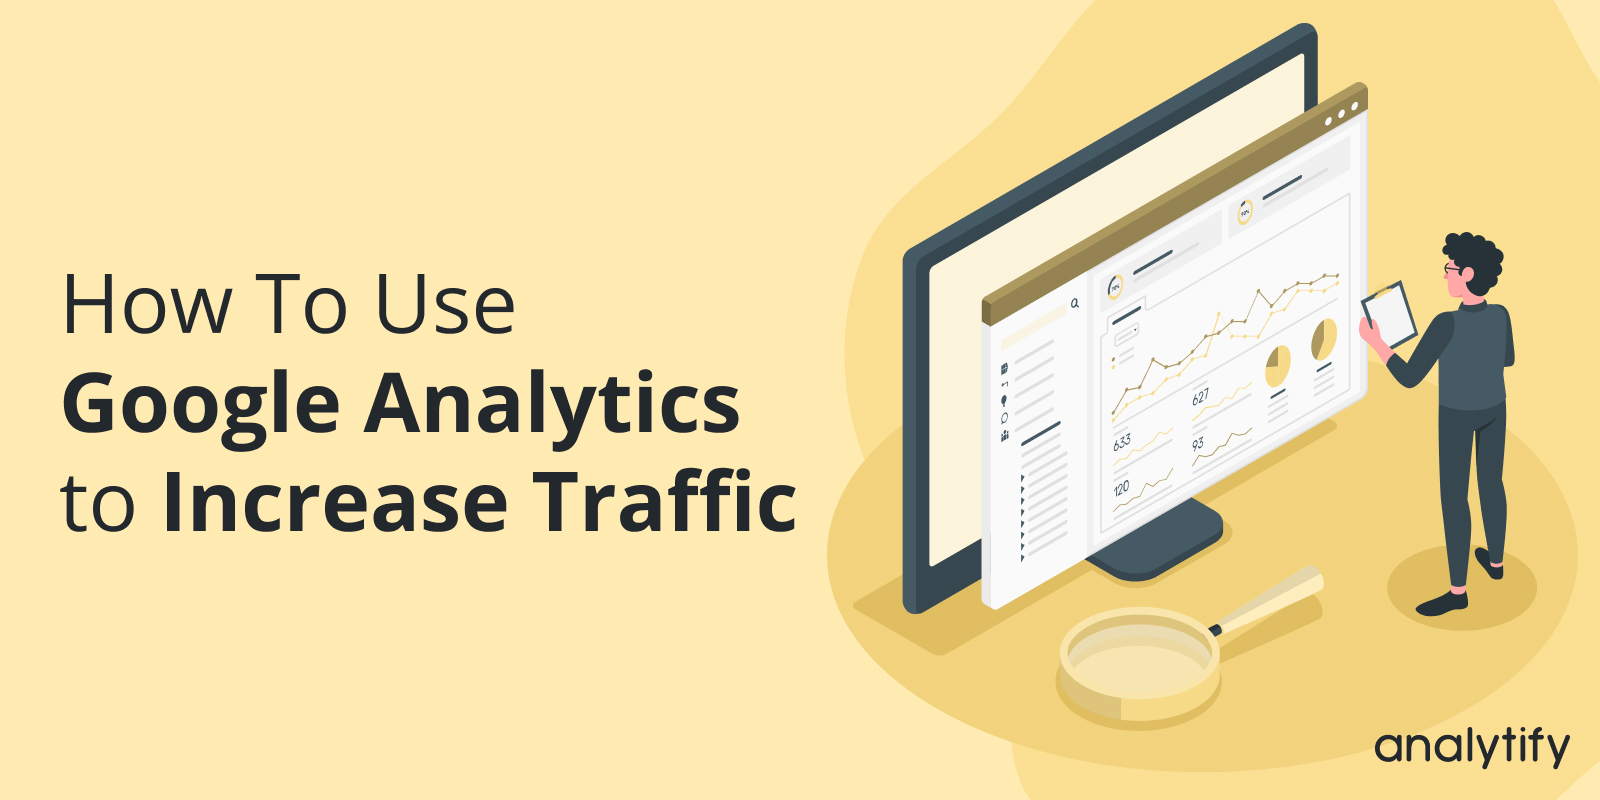 How to Use Google Analytics to Increase Traffic